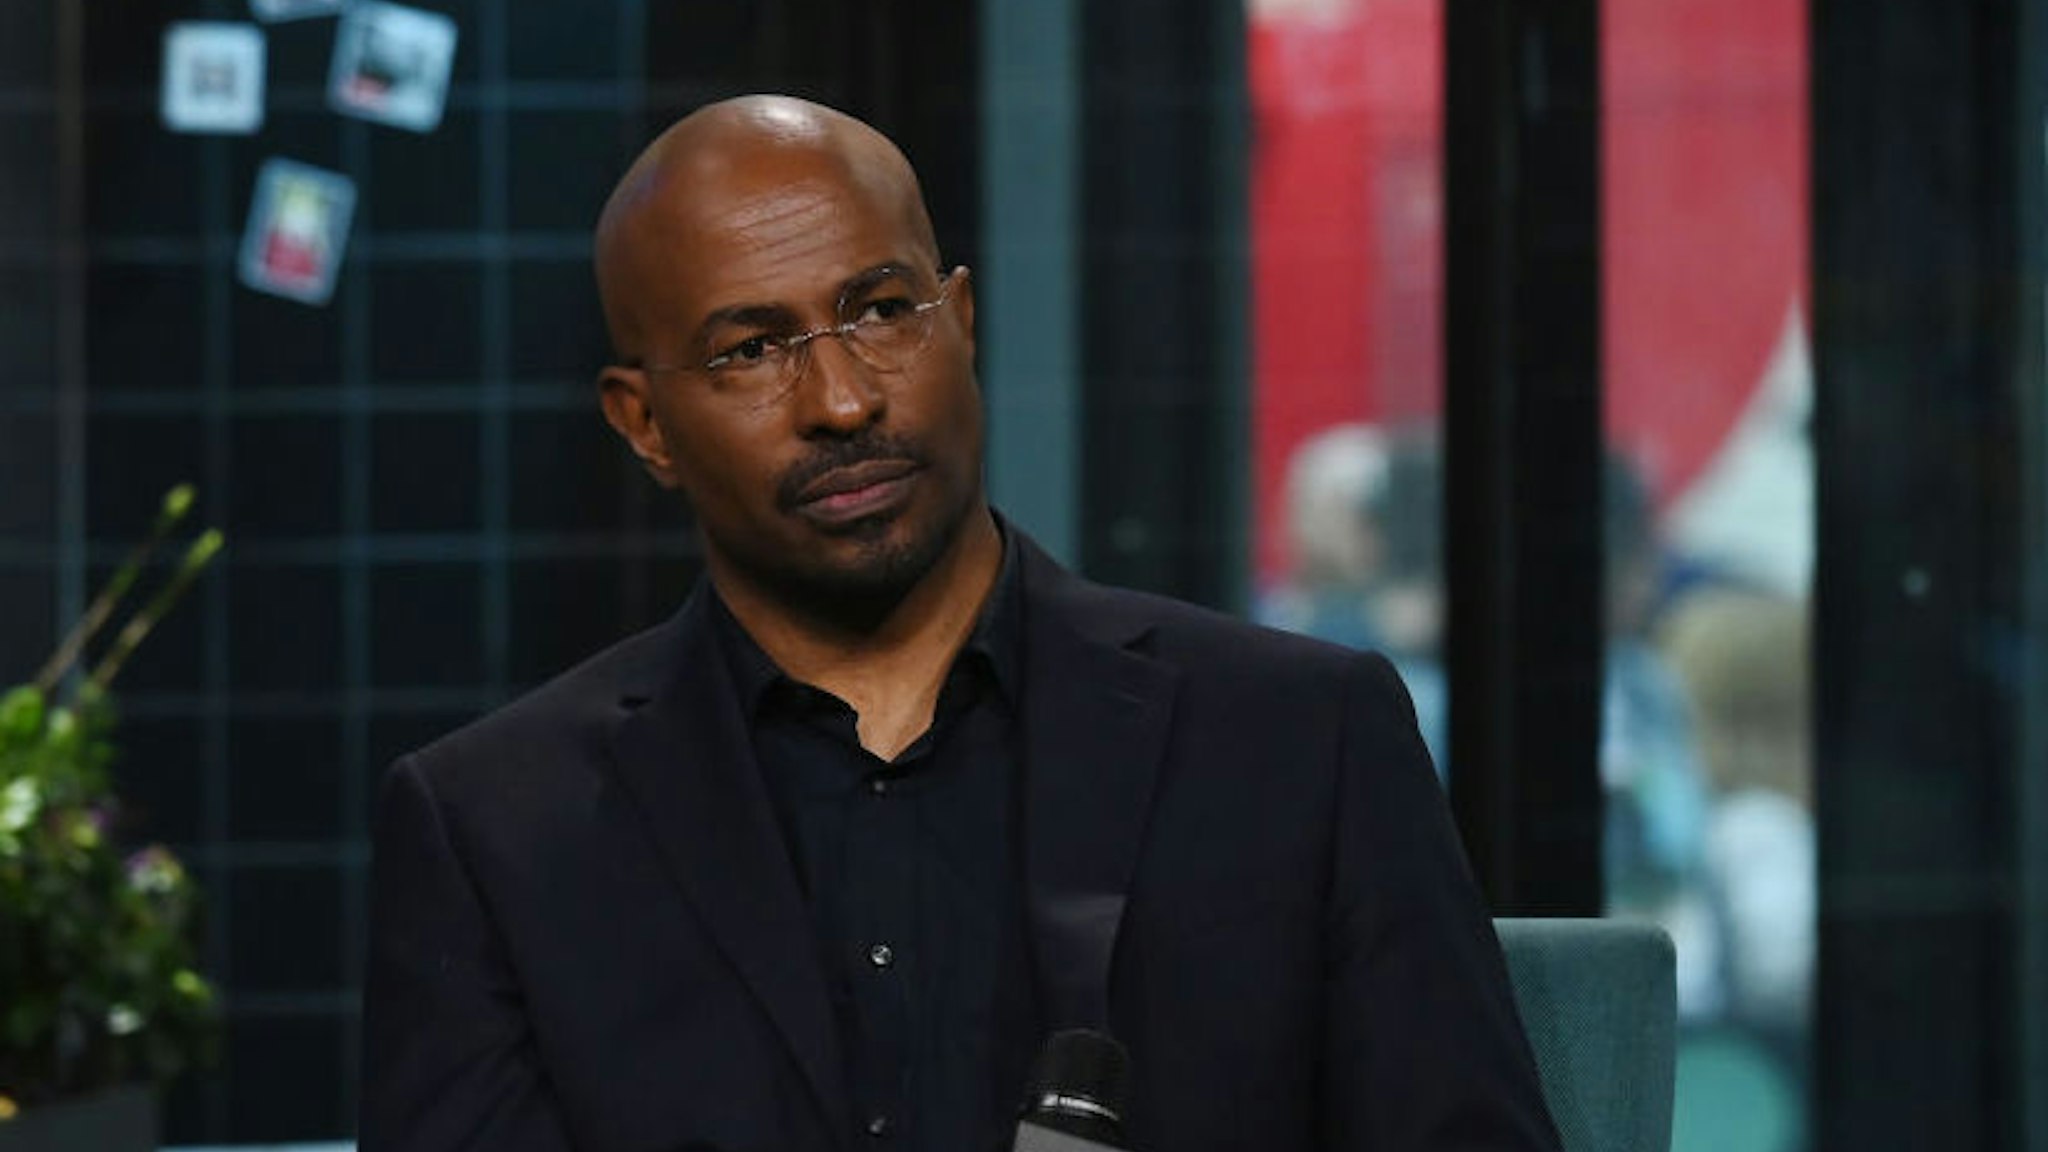 Van Jones attends the Build Series to discuss "The Redemption Project" at Build Studio on April 23, 2019 in New York City. (Photo by Nicholas Hunt/Getty Images)